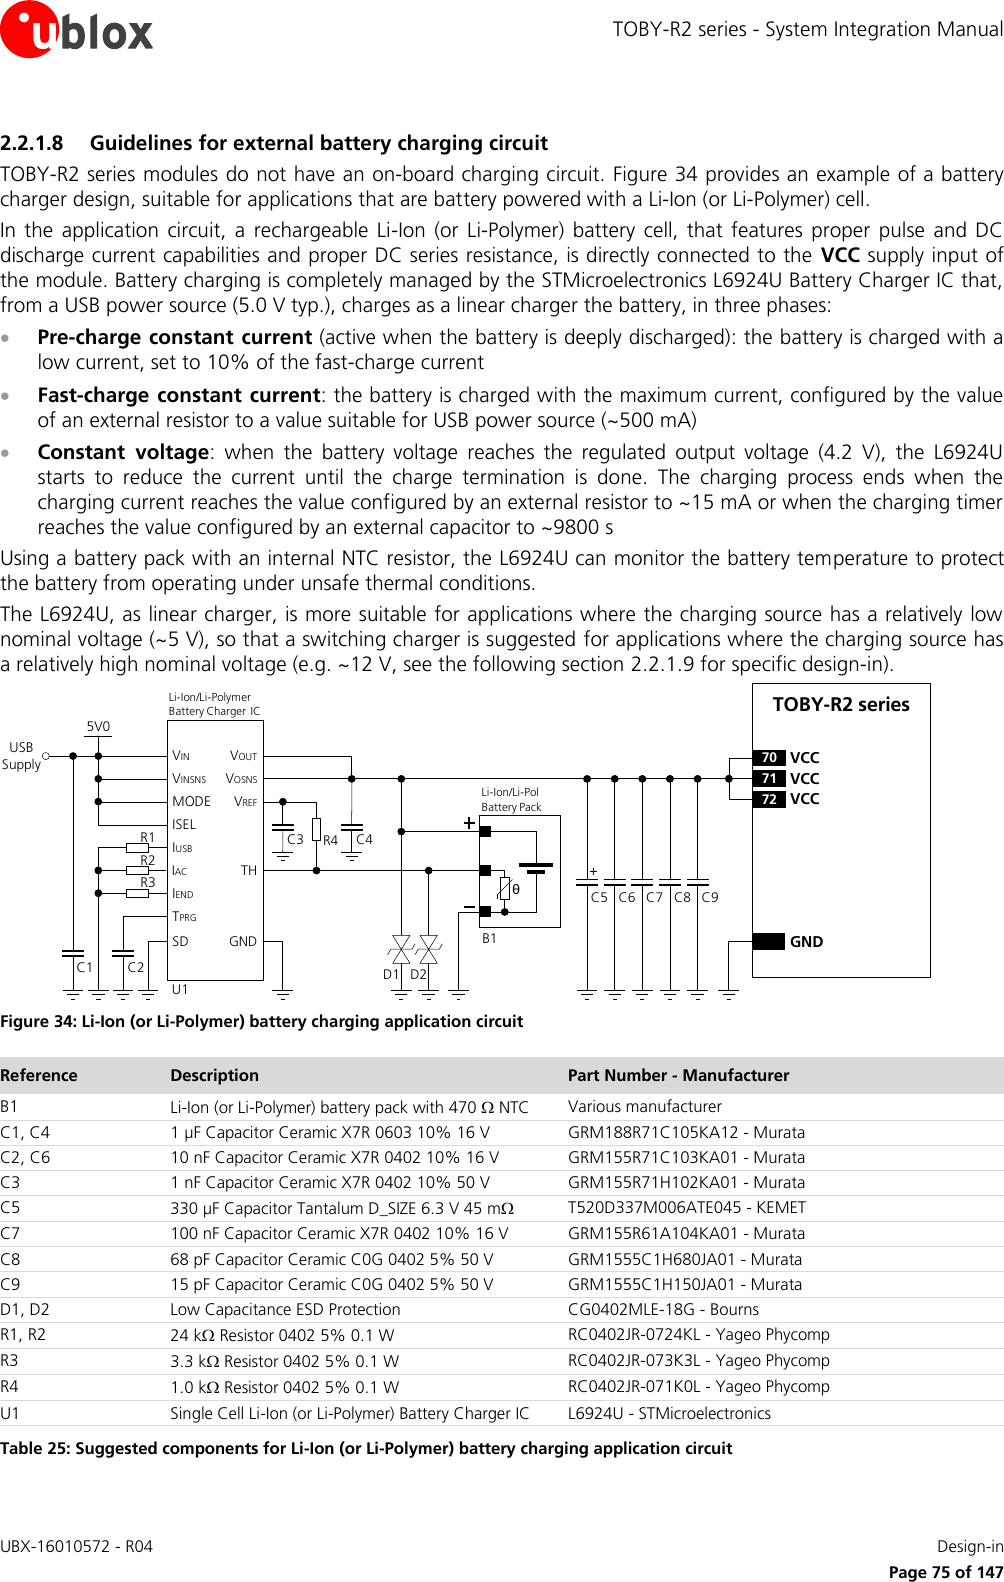 TOBY-R2 series - System Integration Manual UBX-16010572 - R04    Design-in     Page 75 of 147 2.2.1.8 Guidelines for external battery charging circuit TOBY-R2 series modules do not have an on-board charging circuit. Figure 34 provides an example of a battery charger design, suitable for applications that are battery powered with a Li-Ion (or Li-Polymer) cell. In  the  application  circuit,  a  rechargeable  Li-Ion  (or  Li-Polymer)  battery  cell, that  features  proper  pulse  and  DC discharge current capabilities and proper DC series resistance, is directly connected to the  VCC supply input of the module. Battery charging is completely managed by the STMicroelectronics L6924U Battery Charger IC that, from a USB power source (5.0 V typ.), charges as a linear charger the battery, in three phases:  Pre-charge constant current (active when the battery is deeply discharged): the battery is charged with a low current, set to 10% of the fast-charge current  Fast-charge constant current: the battery is charged with the maximum current, configured by the value of an external resistor to a value suitable for USB power source (~500 mA)  Constant  voltage:  when  the  battery  voltage  reaches  the  regulated  output  voltage  (4.2  V),  the  L6924U starts  to  reduce  the  current  until  the  charge  termination  is  done.  The  charging  process  ends  when  the charging current reaches the value configured by an external resistor to ~15 mA or when the charging timer reaches the value configured by an external capacitor to ~9800 s Using a battery pack with an internal NTC resistor, the L6924U can monitor the battery temperature to protect the battery from operating under unsafe thermal conditions. The L6924U, as linear charger, is more suitable for applications where the charging source has a relatively low nominal voltage (~5 V), so that a switching charger is suggested for applications where the charging source has a relatively high nominal voltage (e.g. ~12 V, see the following section 2.2.1.9 for specific design-in). C5 C8C7C6 C9GNDTOBY-R2 series71 VCC72 VCC70 VCC+USB SupplyC3 R4θU1IUSBIACIENDTPRGSDVINVINSNSMODEISELC2C15V0THGNDVOUTVOSNSVREFR1R2R3Li-Ion/Li-Pol Battery PackD1B1C4Li-Ion/Li-Polymer    Battery Charger ICD2 Figure 34: Li-Ion (or Li-Polymer) battery charging application circuit Reference Description Part Number - Manufacturer B1 Li-Ion (or Li-Polymer) battery pack with 470  NTC Various manufacturer C1, C4 1 µF Capacitor Ceramic X7R 0603 10% 16 V GRM188R71C105KA12 - Murata C2, C6 10 nF Capacitor Ceramic X7R 0402 10% 16 V GRM155R71C103KA01 - Murata C3 1 nF Capacitor Ceramic X7R 0402 10% 50 V GRM155R71H102KA01 - Murata C5 330 µF Capacitor Tantalum D_SIZE 6.3 V 45 m T520D337M006ATE045 - KEMET C7 100 nF Capacitor Ceramic X7R 0402 10% 16 V GRM155R61A104KA01 - Murata C8 68 pF Capacitor Ceramic C0G 0402 5% 50 V GRM1555C1H680JA01 - Murata C9 15 pF Capacitor Ceramic C0G 0402 5% 50 V GRM1555C1H150JA01 - Murata D1, D2 Low Capacitance ESD Protection CG0402MLE-18G - Bourns R1, R2 24 k Resistor 0402 5% 0.1 W RC0402JR-0724KL - Yageo Phycomp R3 3.3 k Resistor 0402 5% 0.1 W RC0402JR-073K3L - Yageo Phycomp R4 1.0 k Resistor 0402 5% 0.1 W RC0402JR-071K0L - Yageo Phycomp U1 Single Cell Li-Ion (or Li-Polymer) Battery Charger IC  L6924U - STMicroelectronics Table 25: Suggested components for Li-Ion (or Li-Polymer) battery charging application circuit  